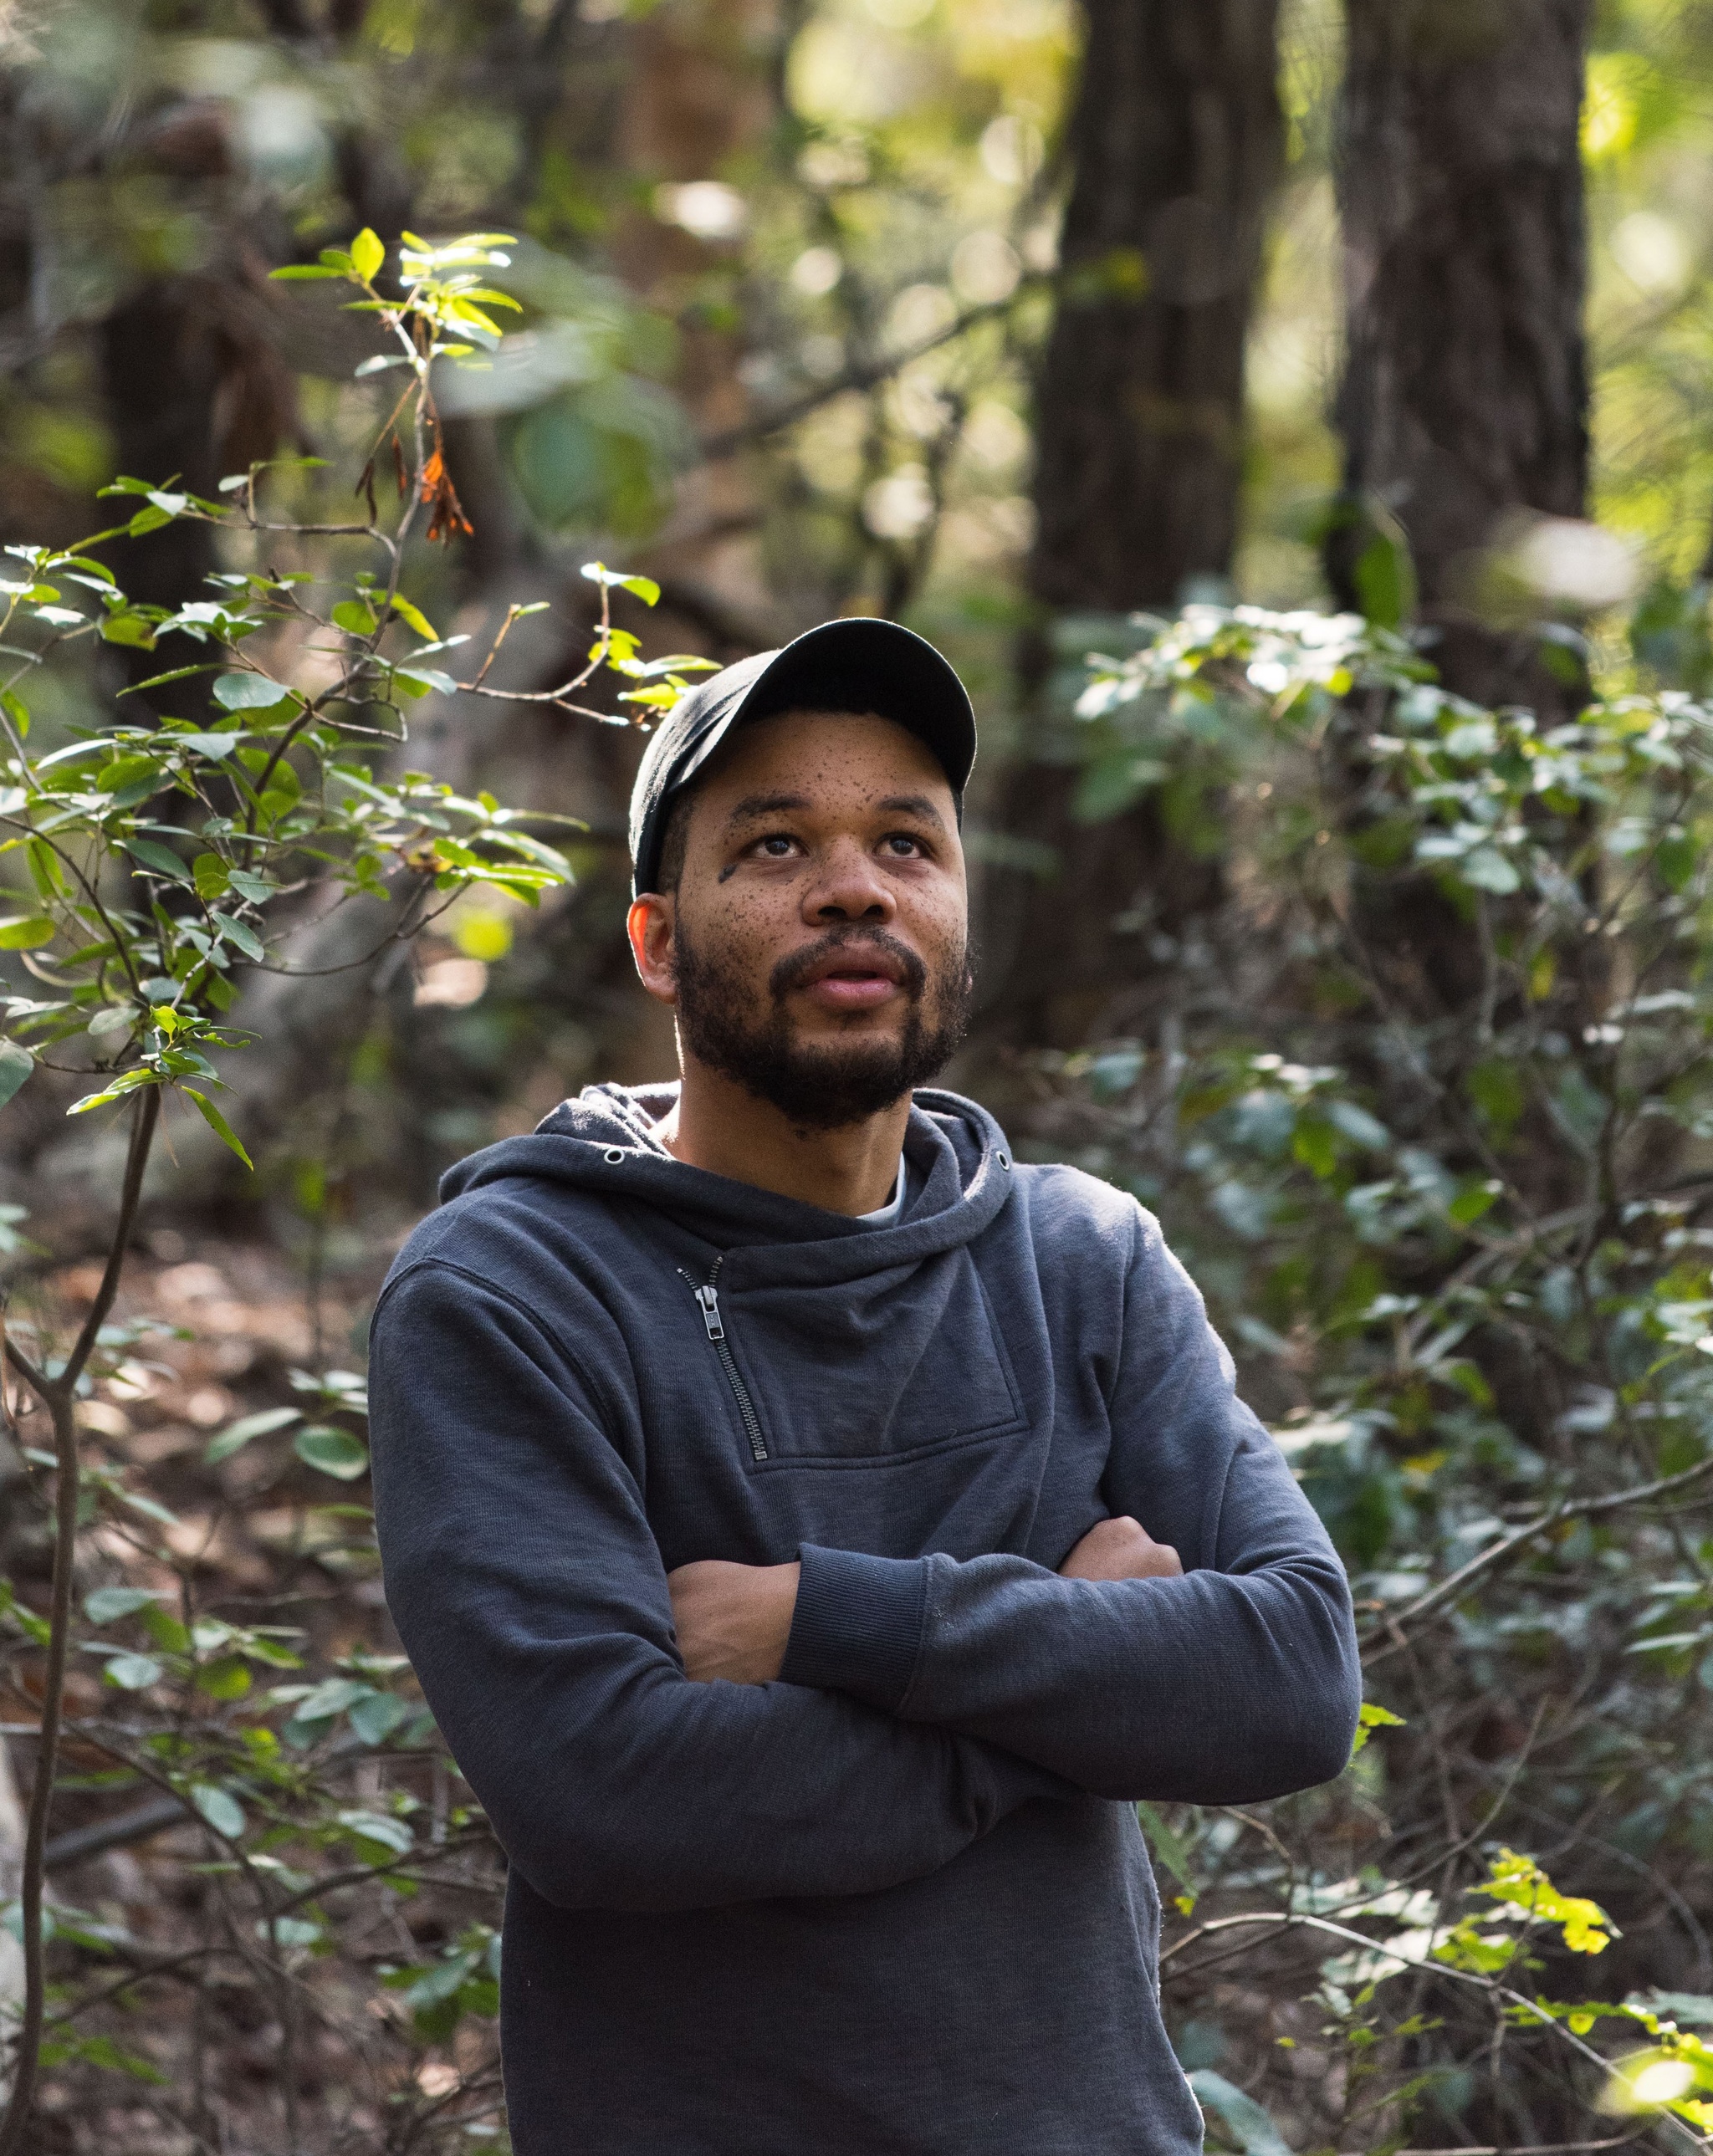 A portrait of Collision/Coalition artist Oscar Murillo in a forest looking up at trees